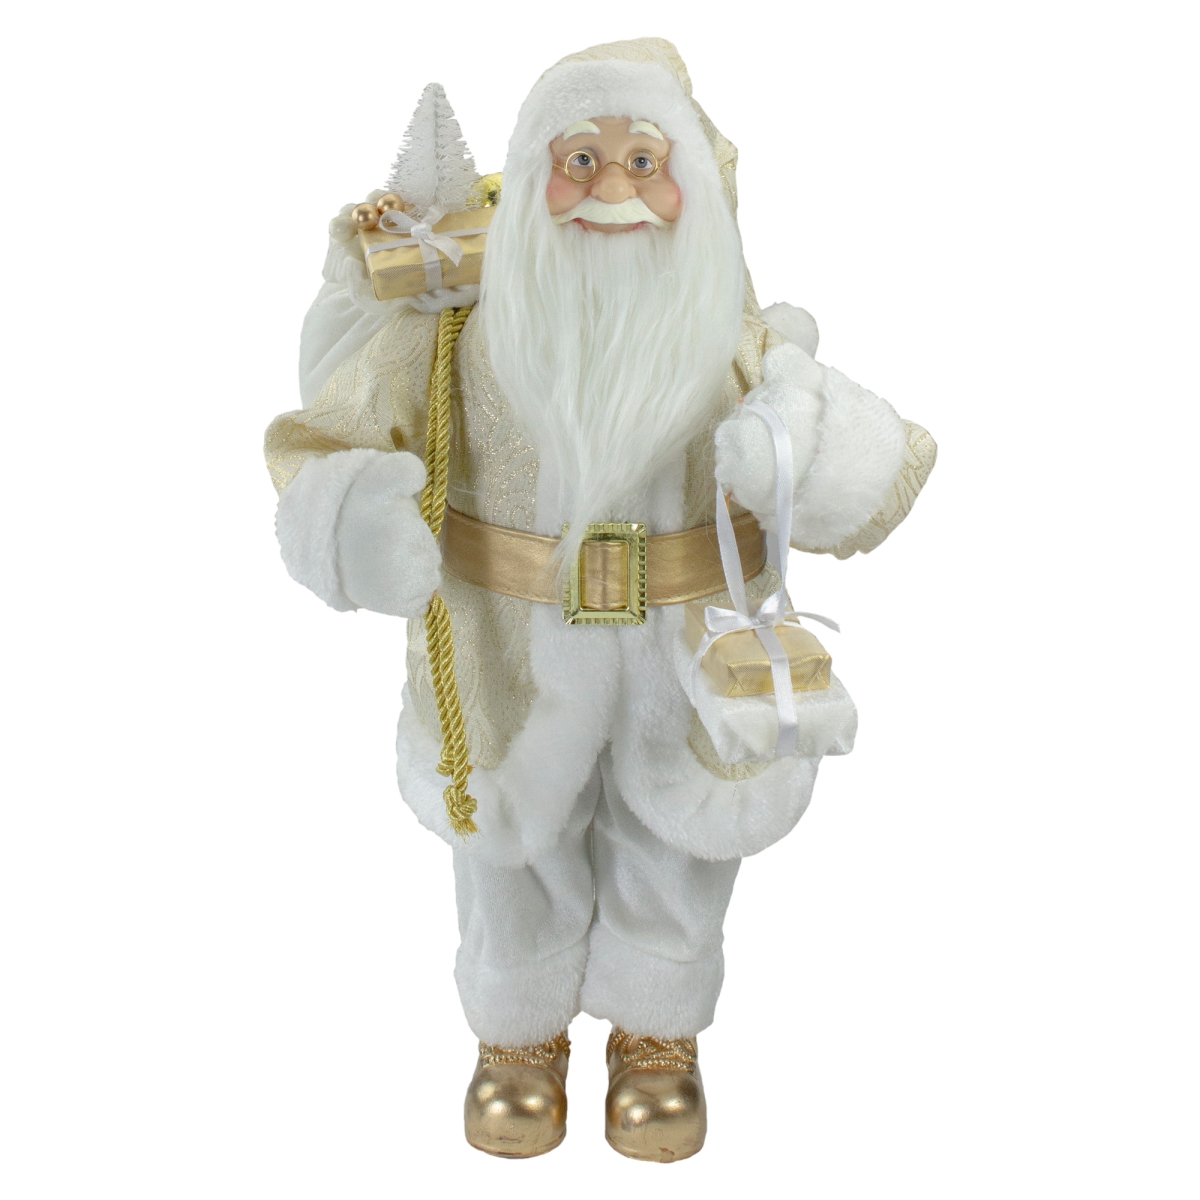 Picture of Northlight 34316593 18 Standing Santa Christmas Figure Carrying Presents Wearing - White & Gold